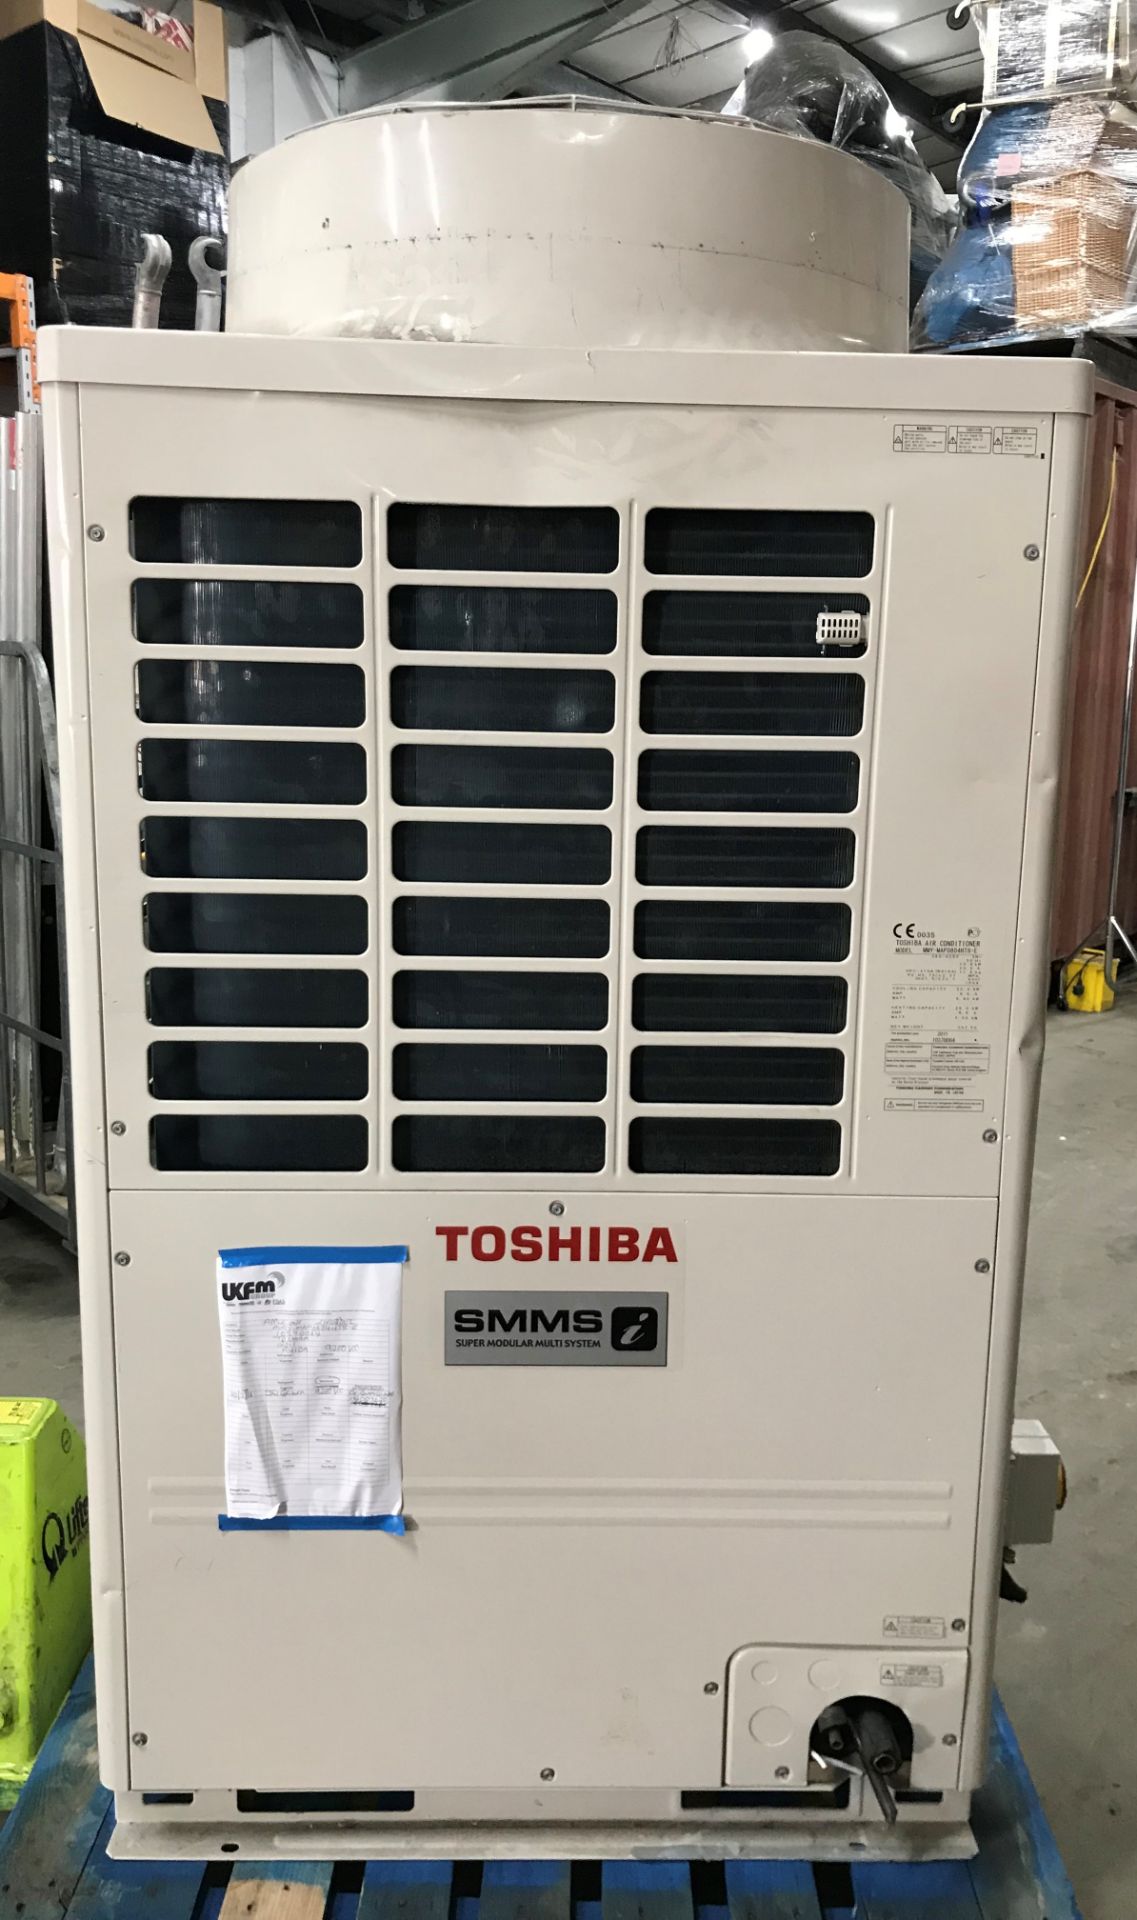 Toshiba SMMSi MMY-MAP0804HT8-E Outdoor Air Conditioning Unit | 2011 - Image 3 of 8